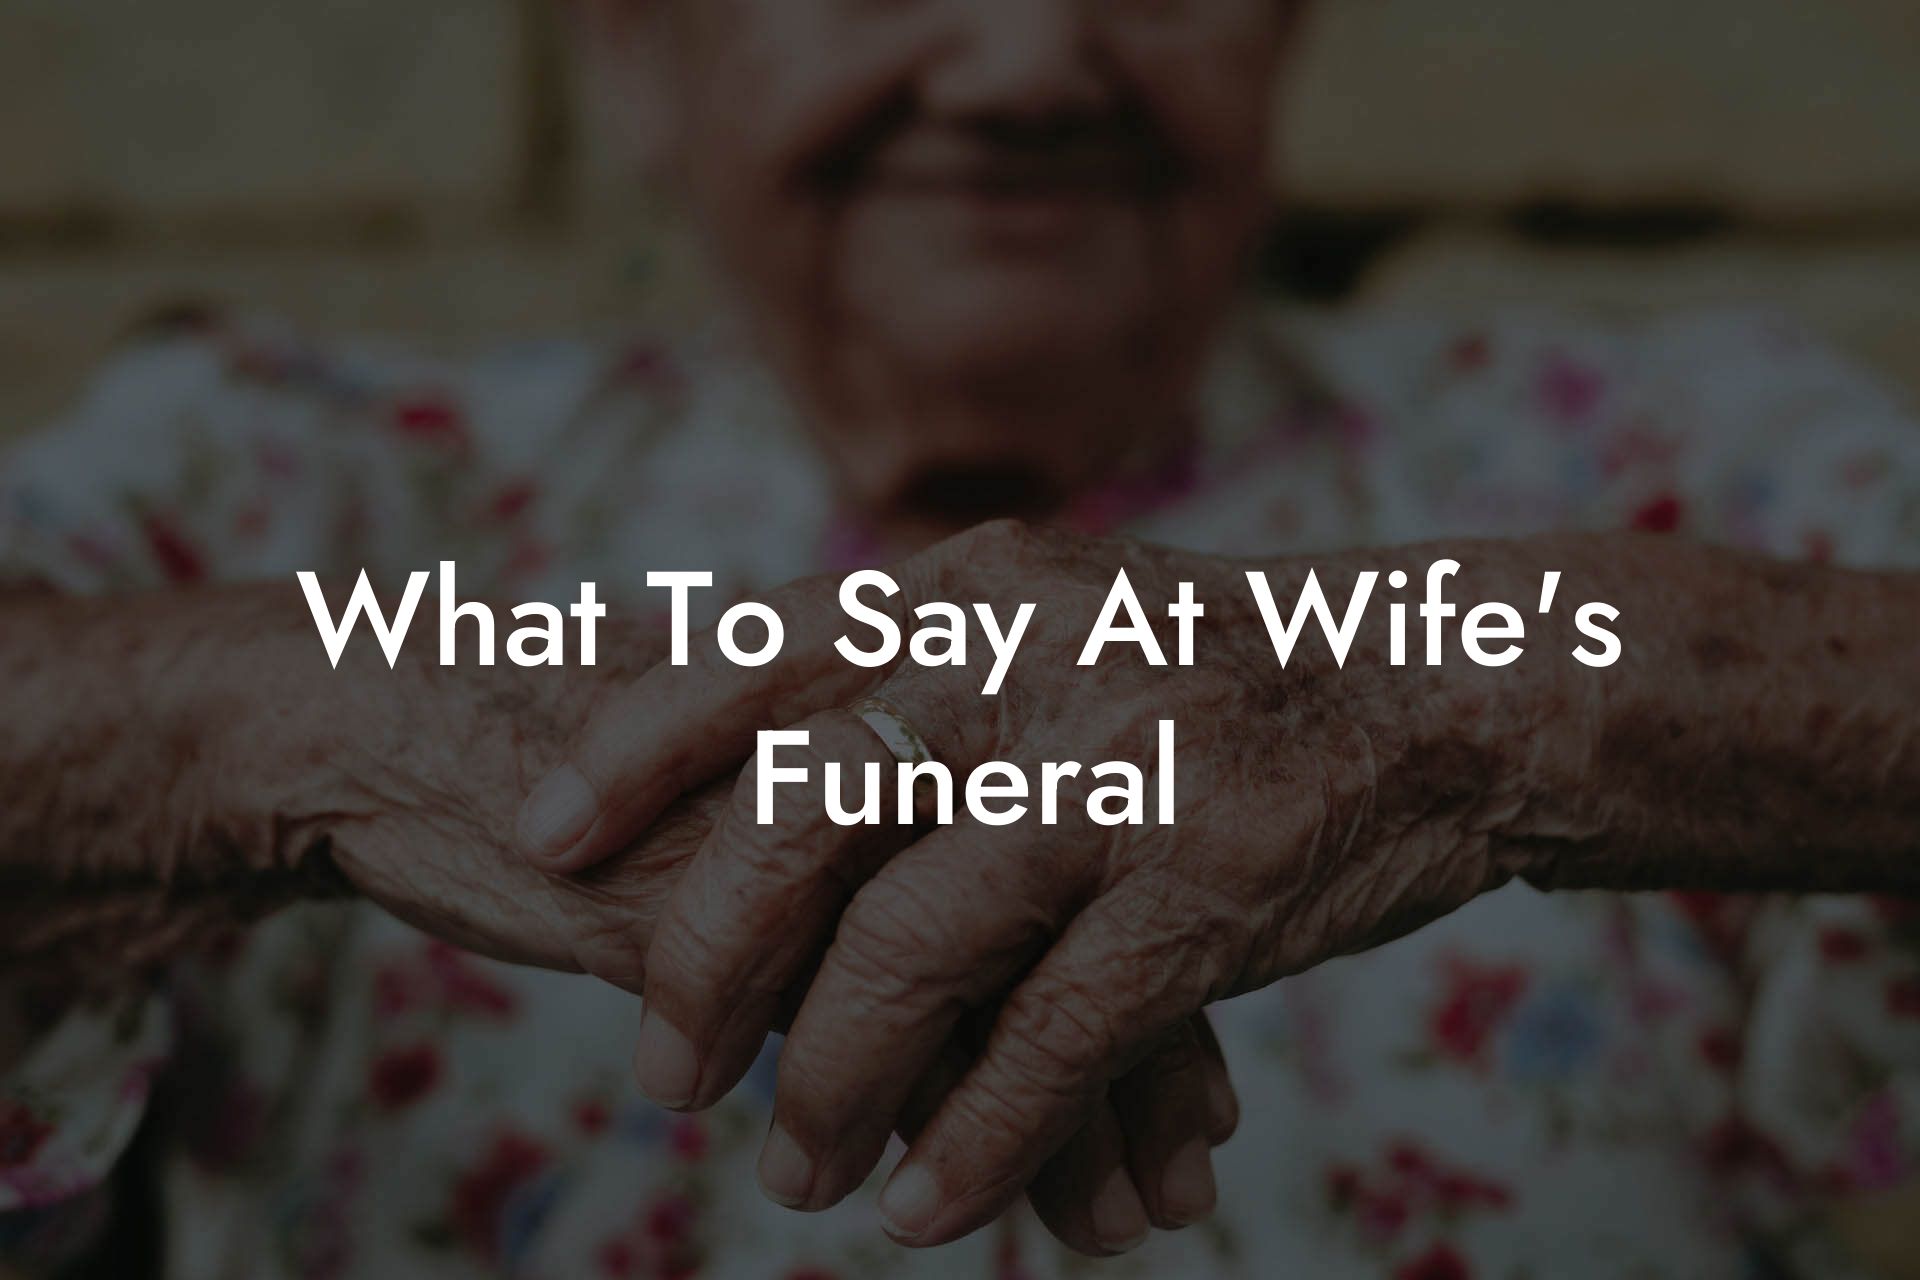 What To Say At Wife's Funeral